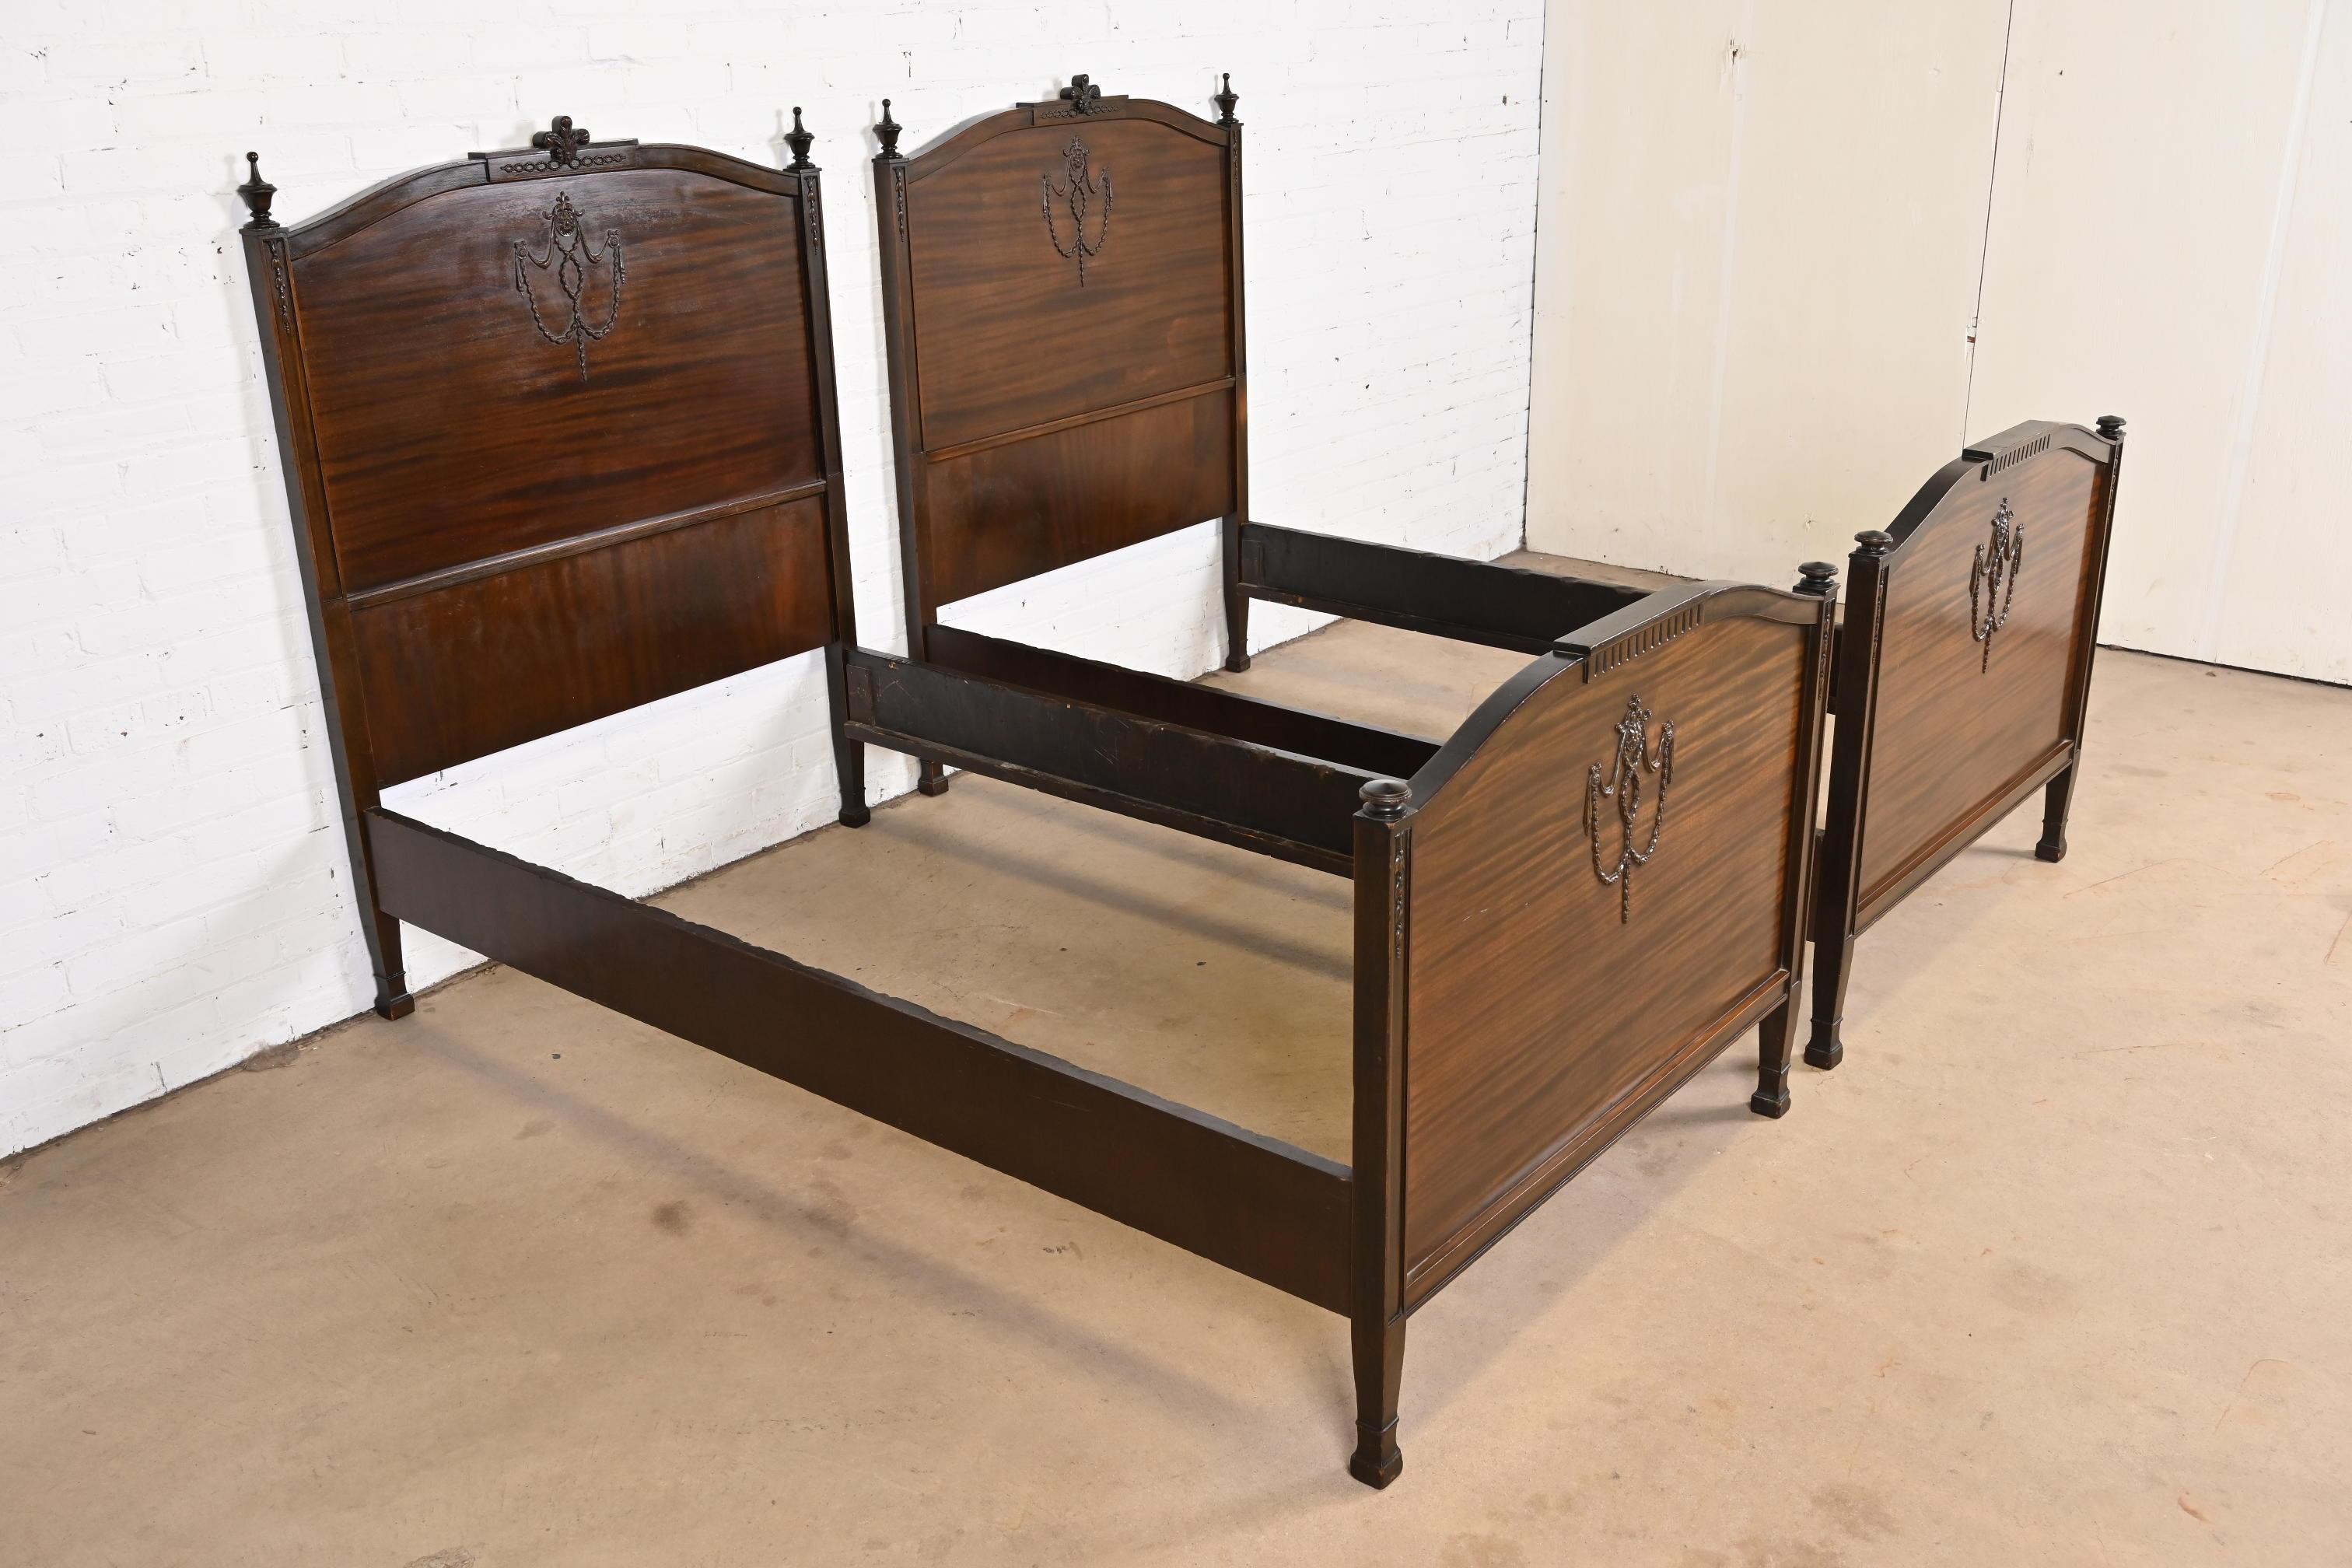 A gorgeous pair of antique French Regency Louis XVI style carved mahogany twin Size beds

In the style of Romweber

USA, Early 20th century

Measures: 42